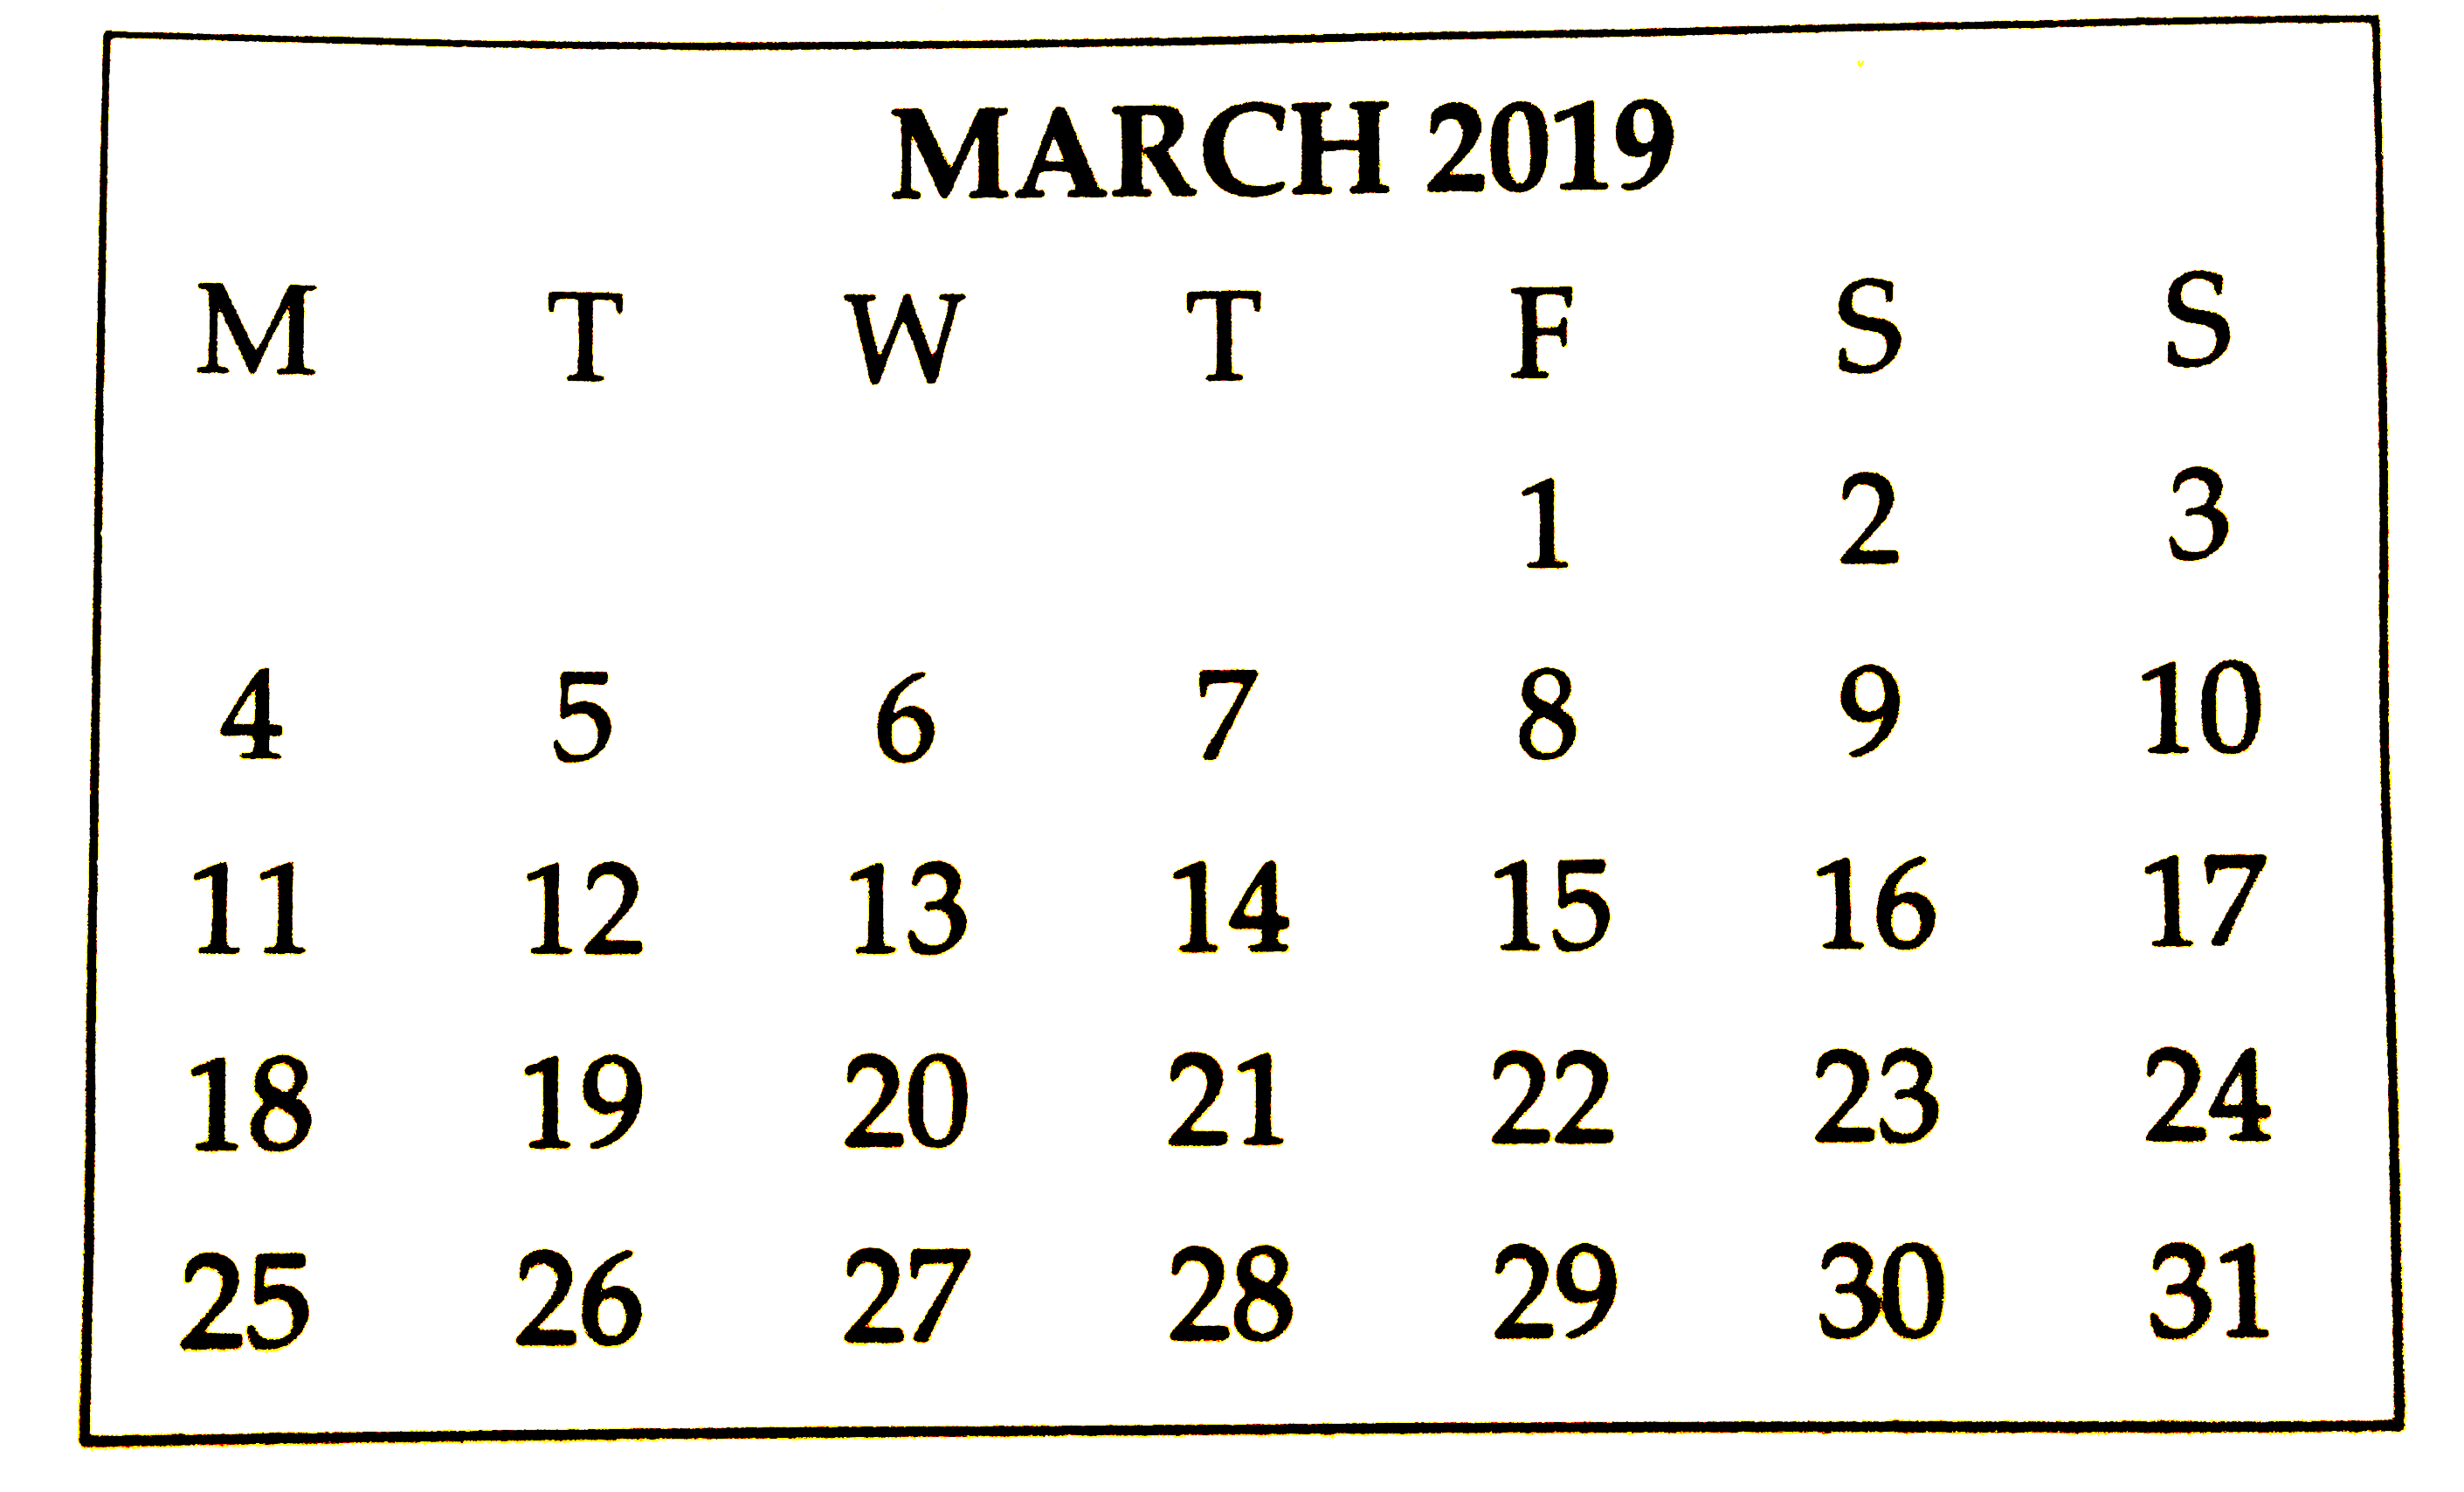 In the month of March 2019, find the days on which the date is a multiple of 5. (see the given page of calendar)